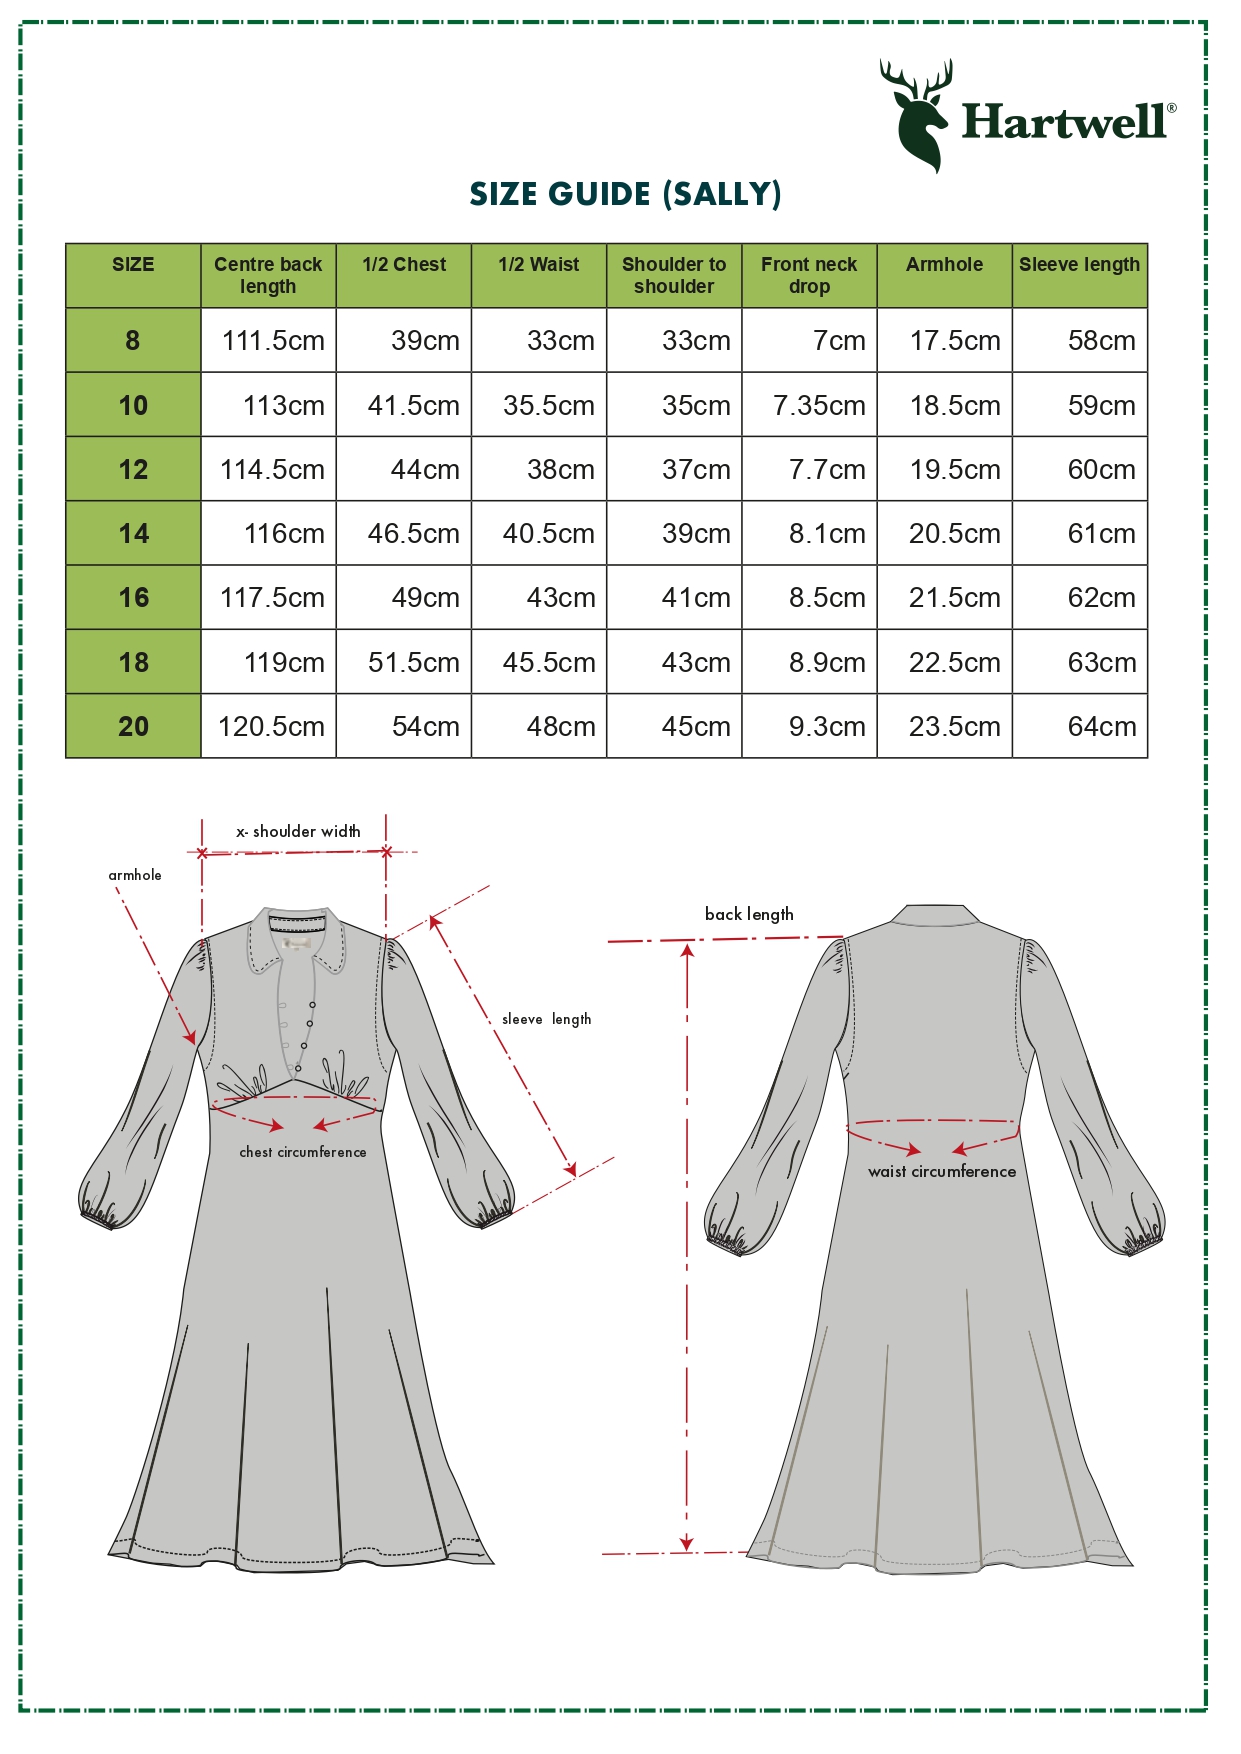 SALLY SIZE GUIDE